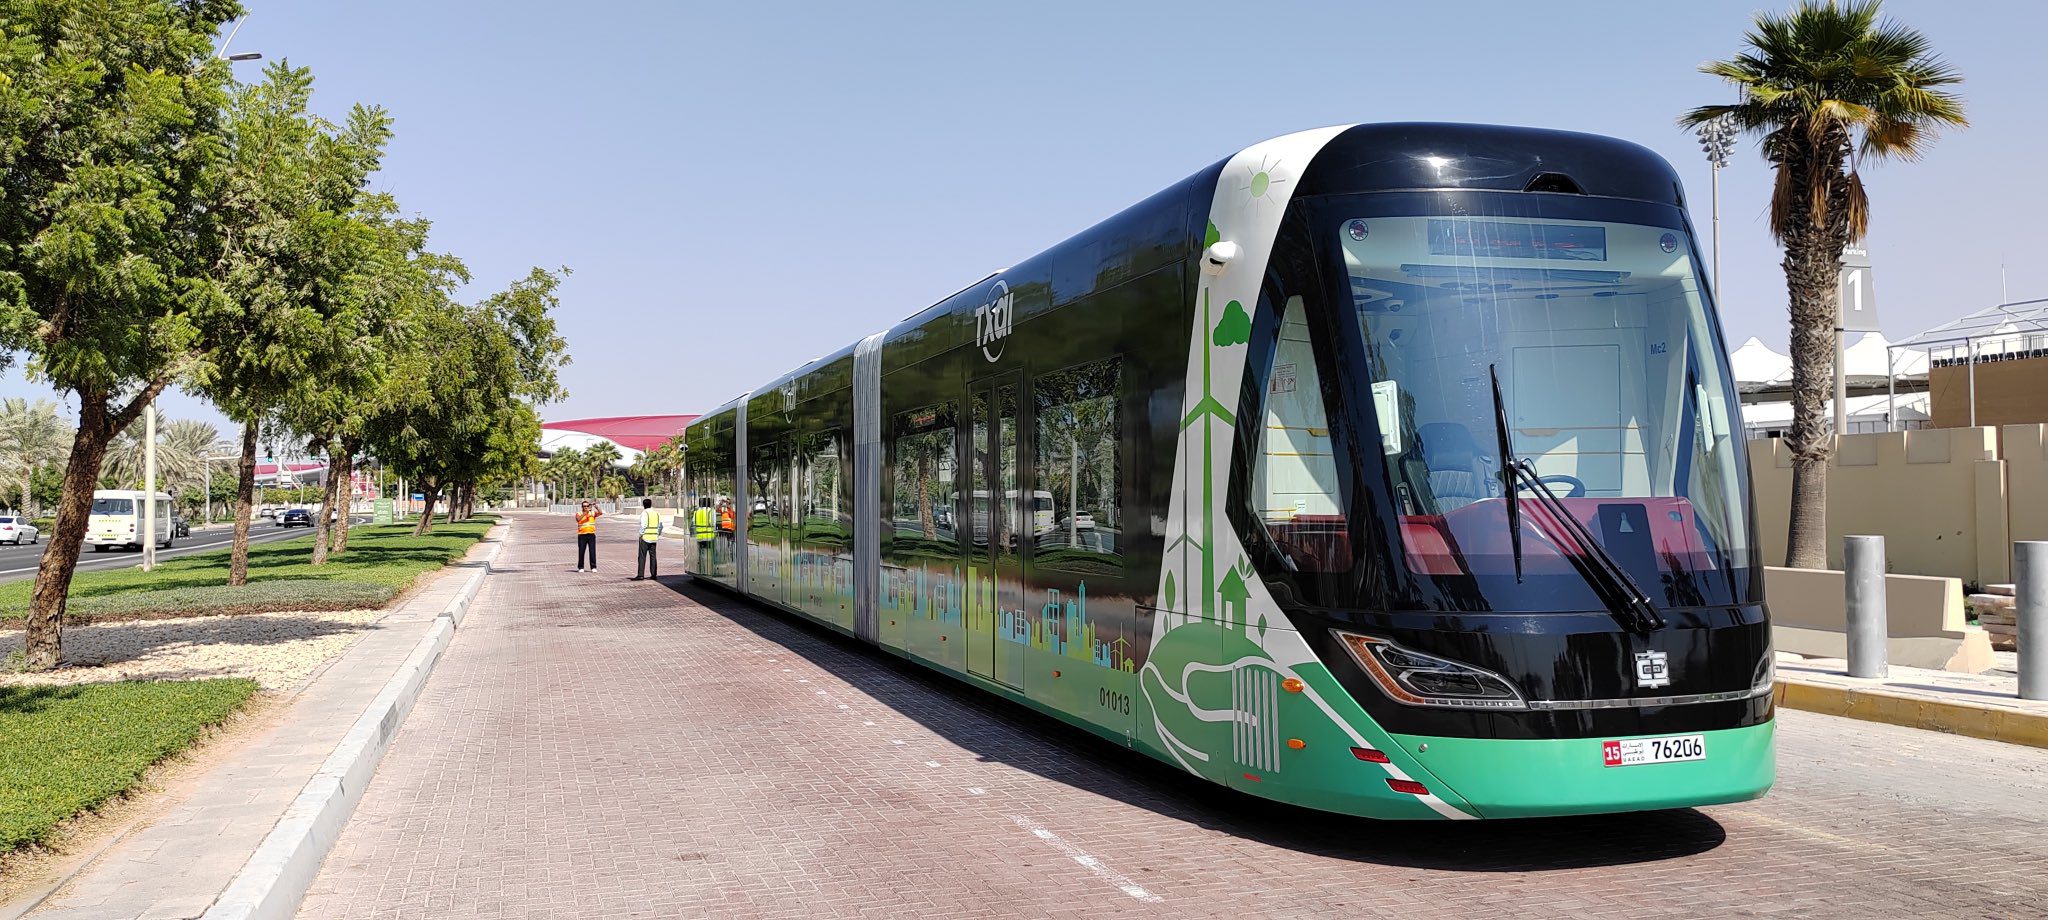 Abu Dhabi introduces tram-like electric buses in the city - CEO Times